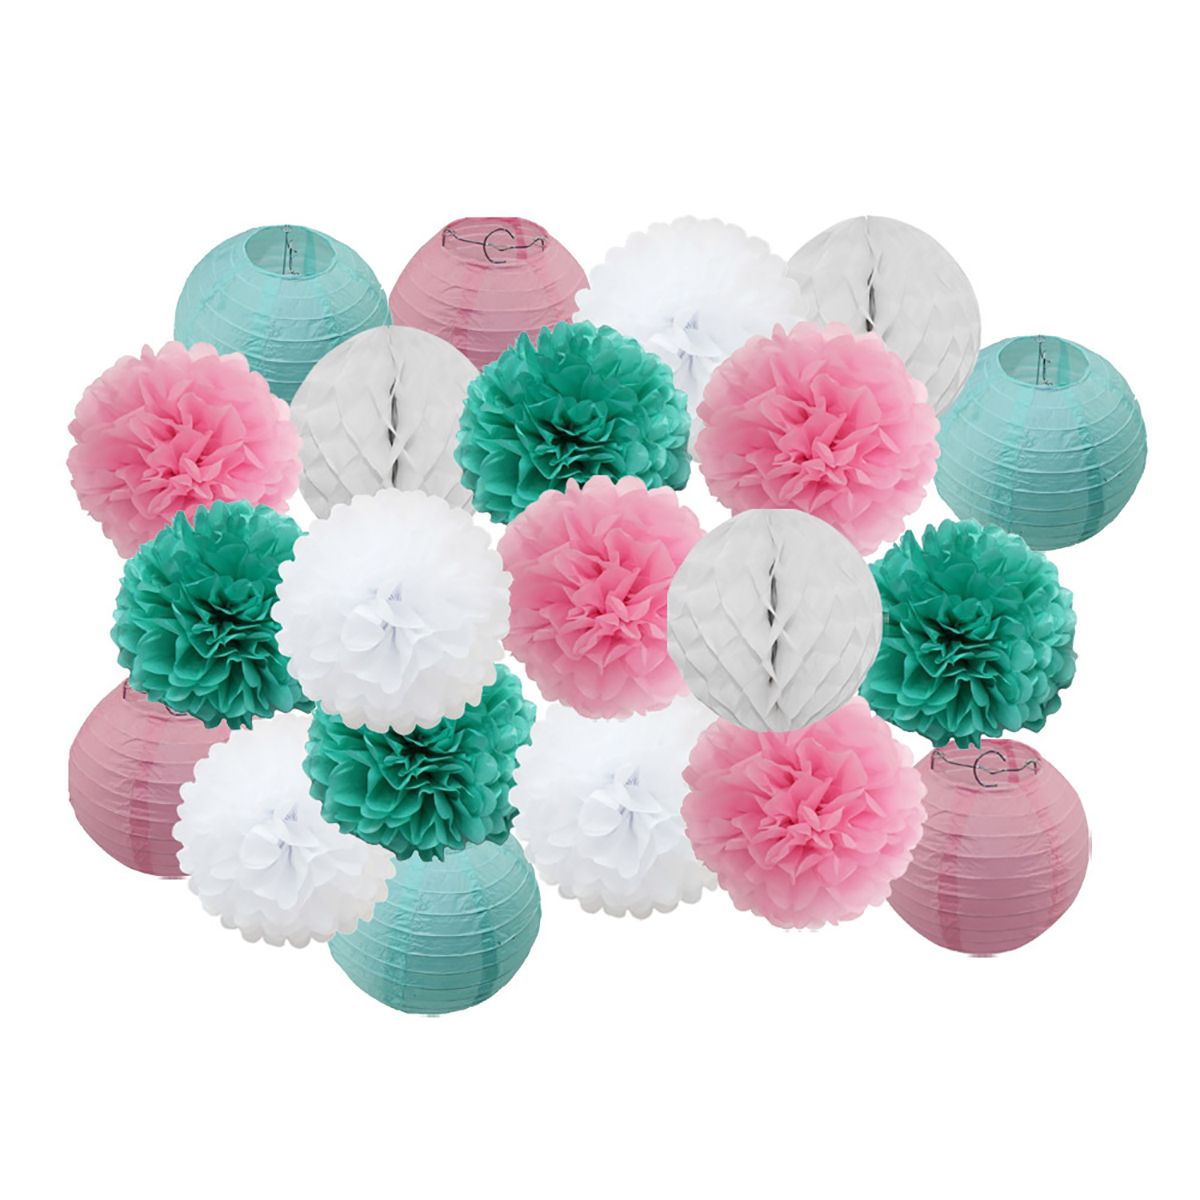 21pcsset-Round-Paper-Lantern-For-Boy-Girl-Baptism-Wedding-Holloween-Party-Decorations-Hanging-Paper--1638293